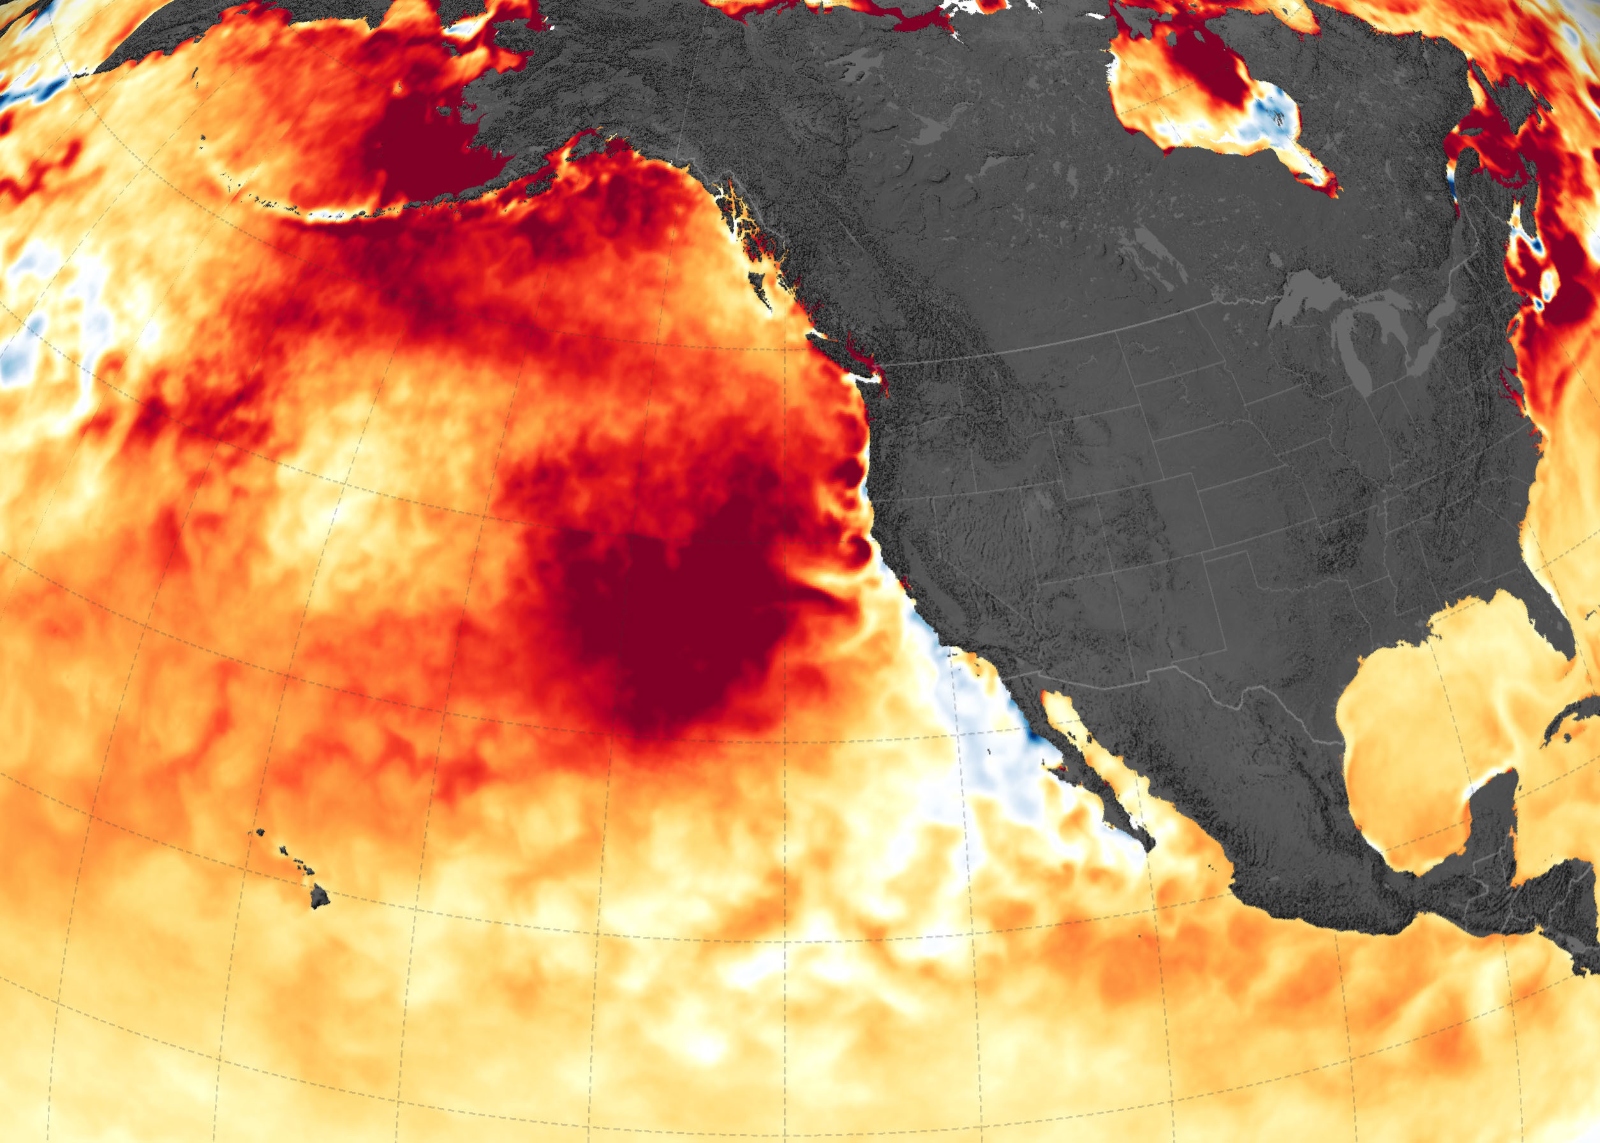 A map showing heat over the Pacific in yellow and red.